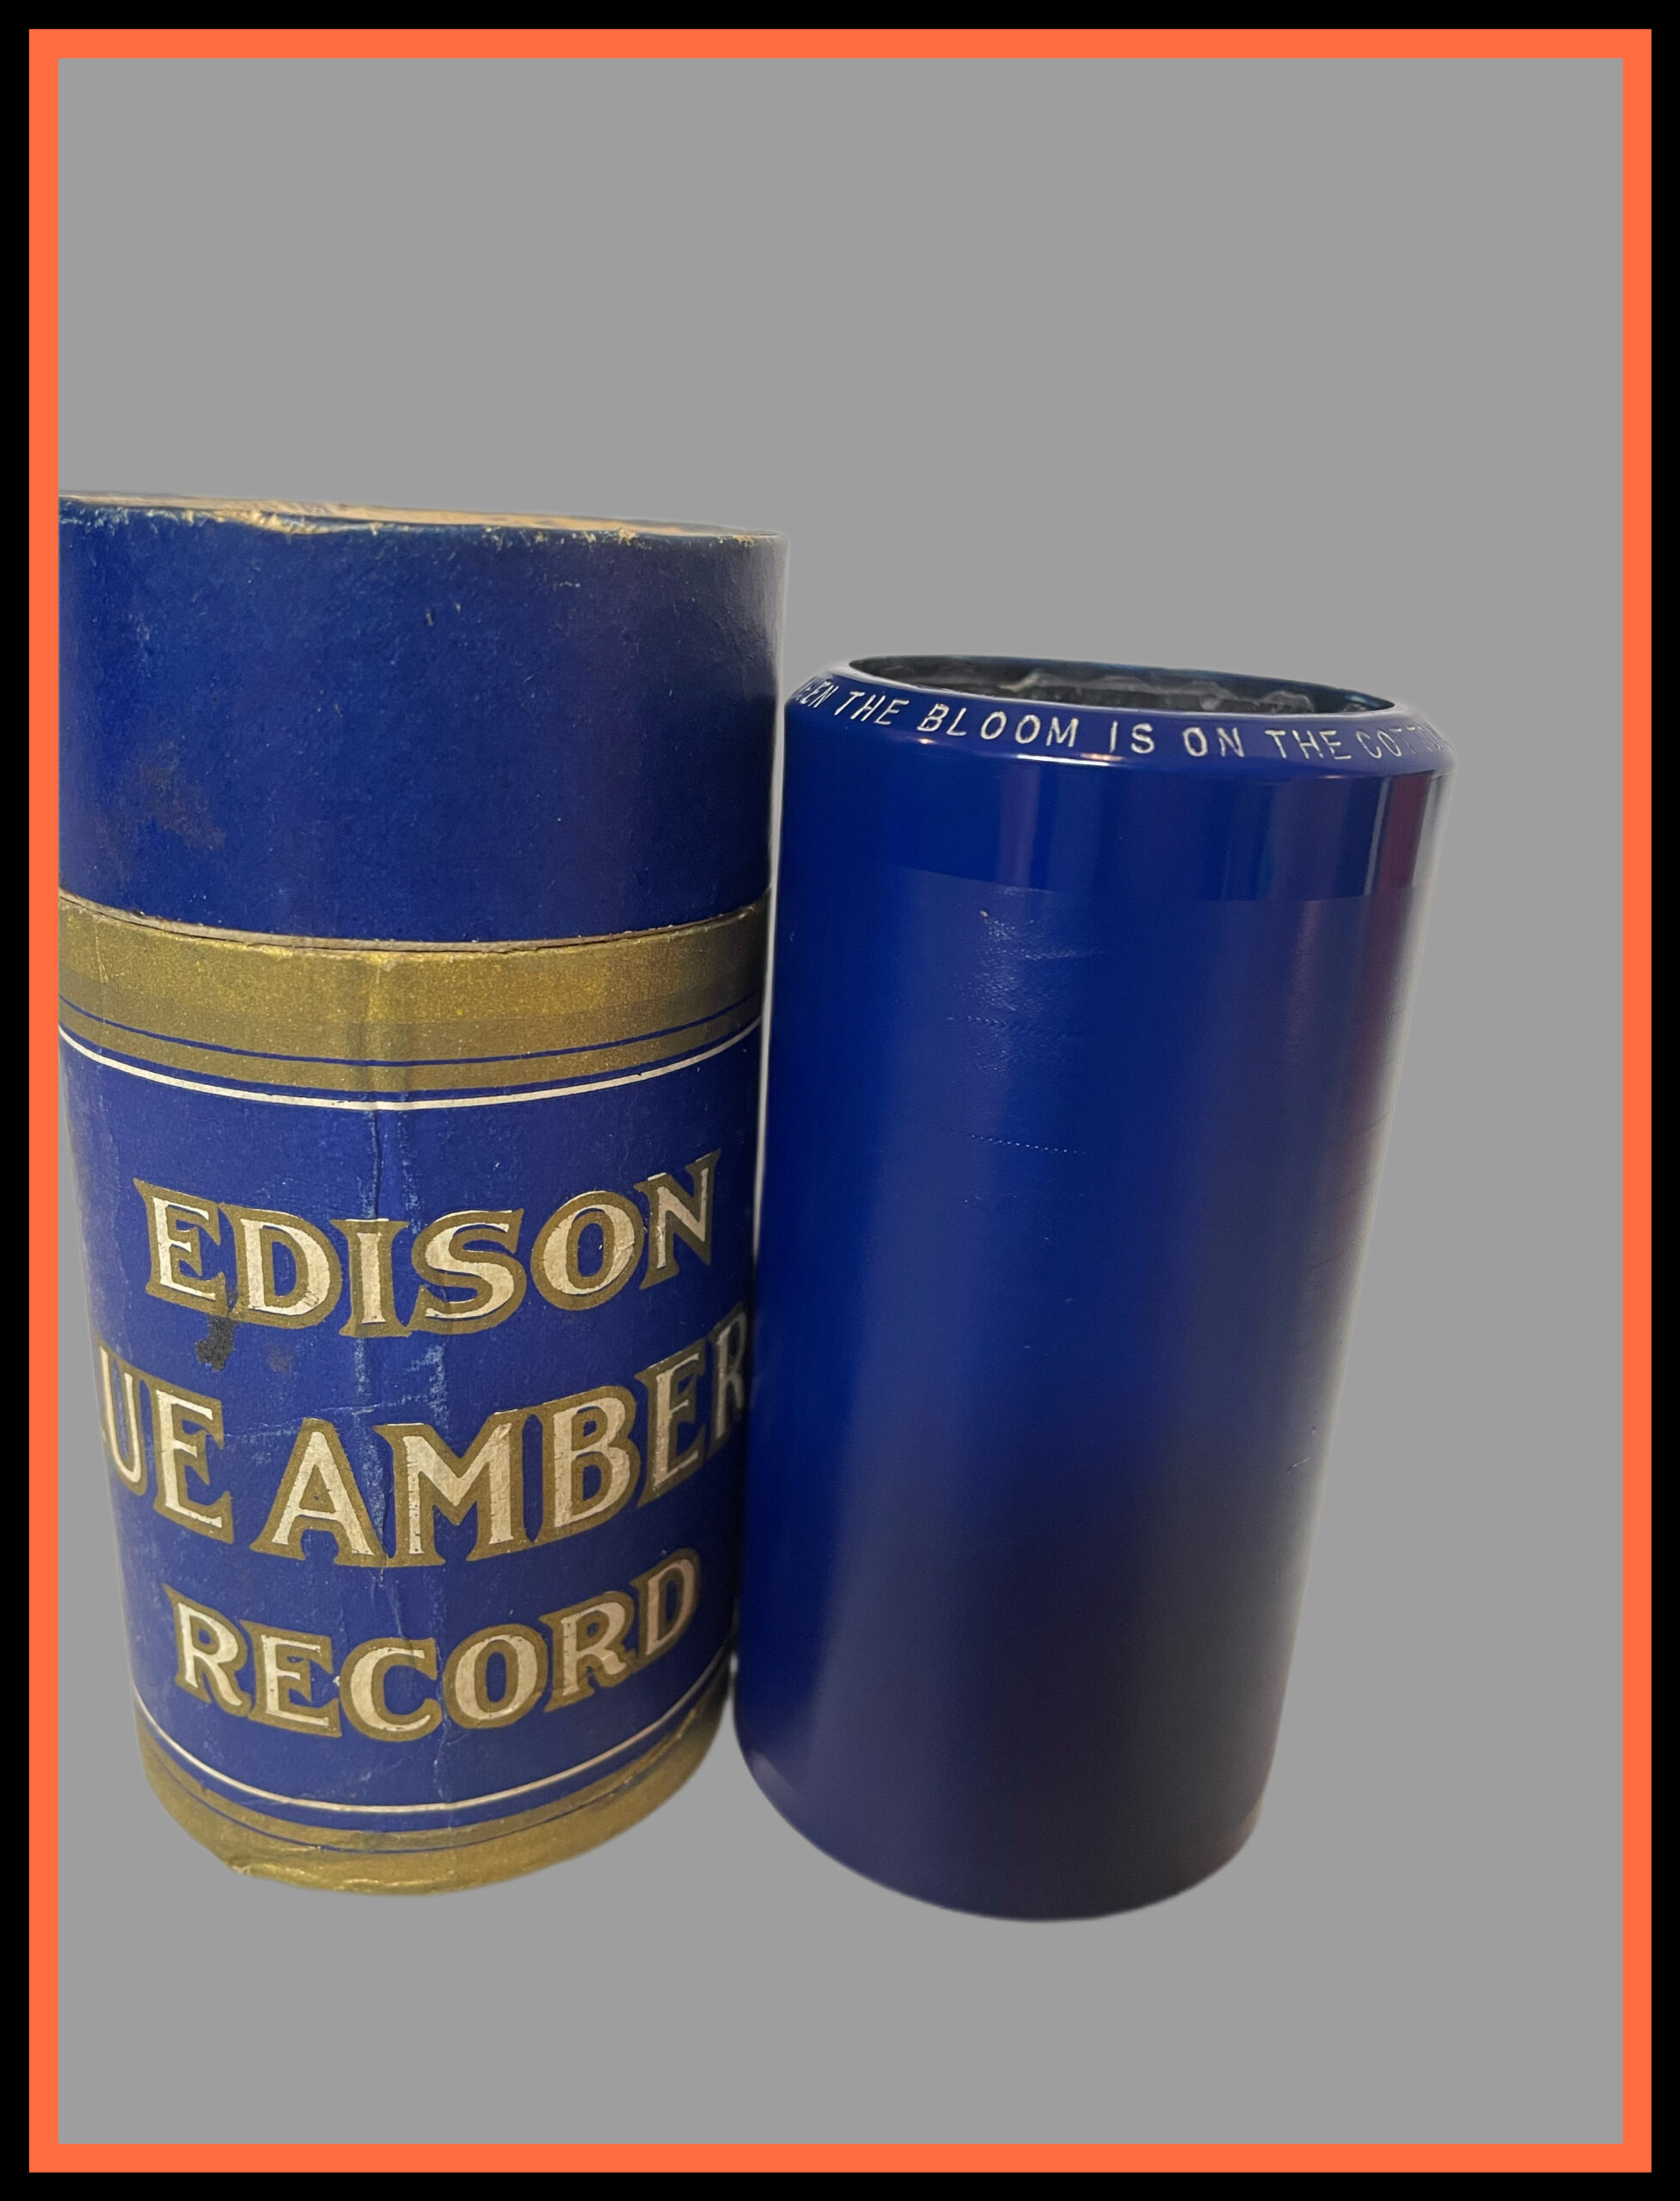 Edison 4 minute cylinder… “Say It with Flowers”